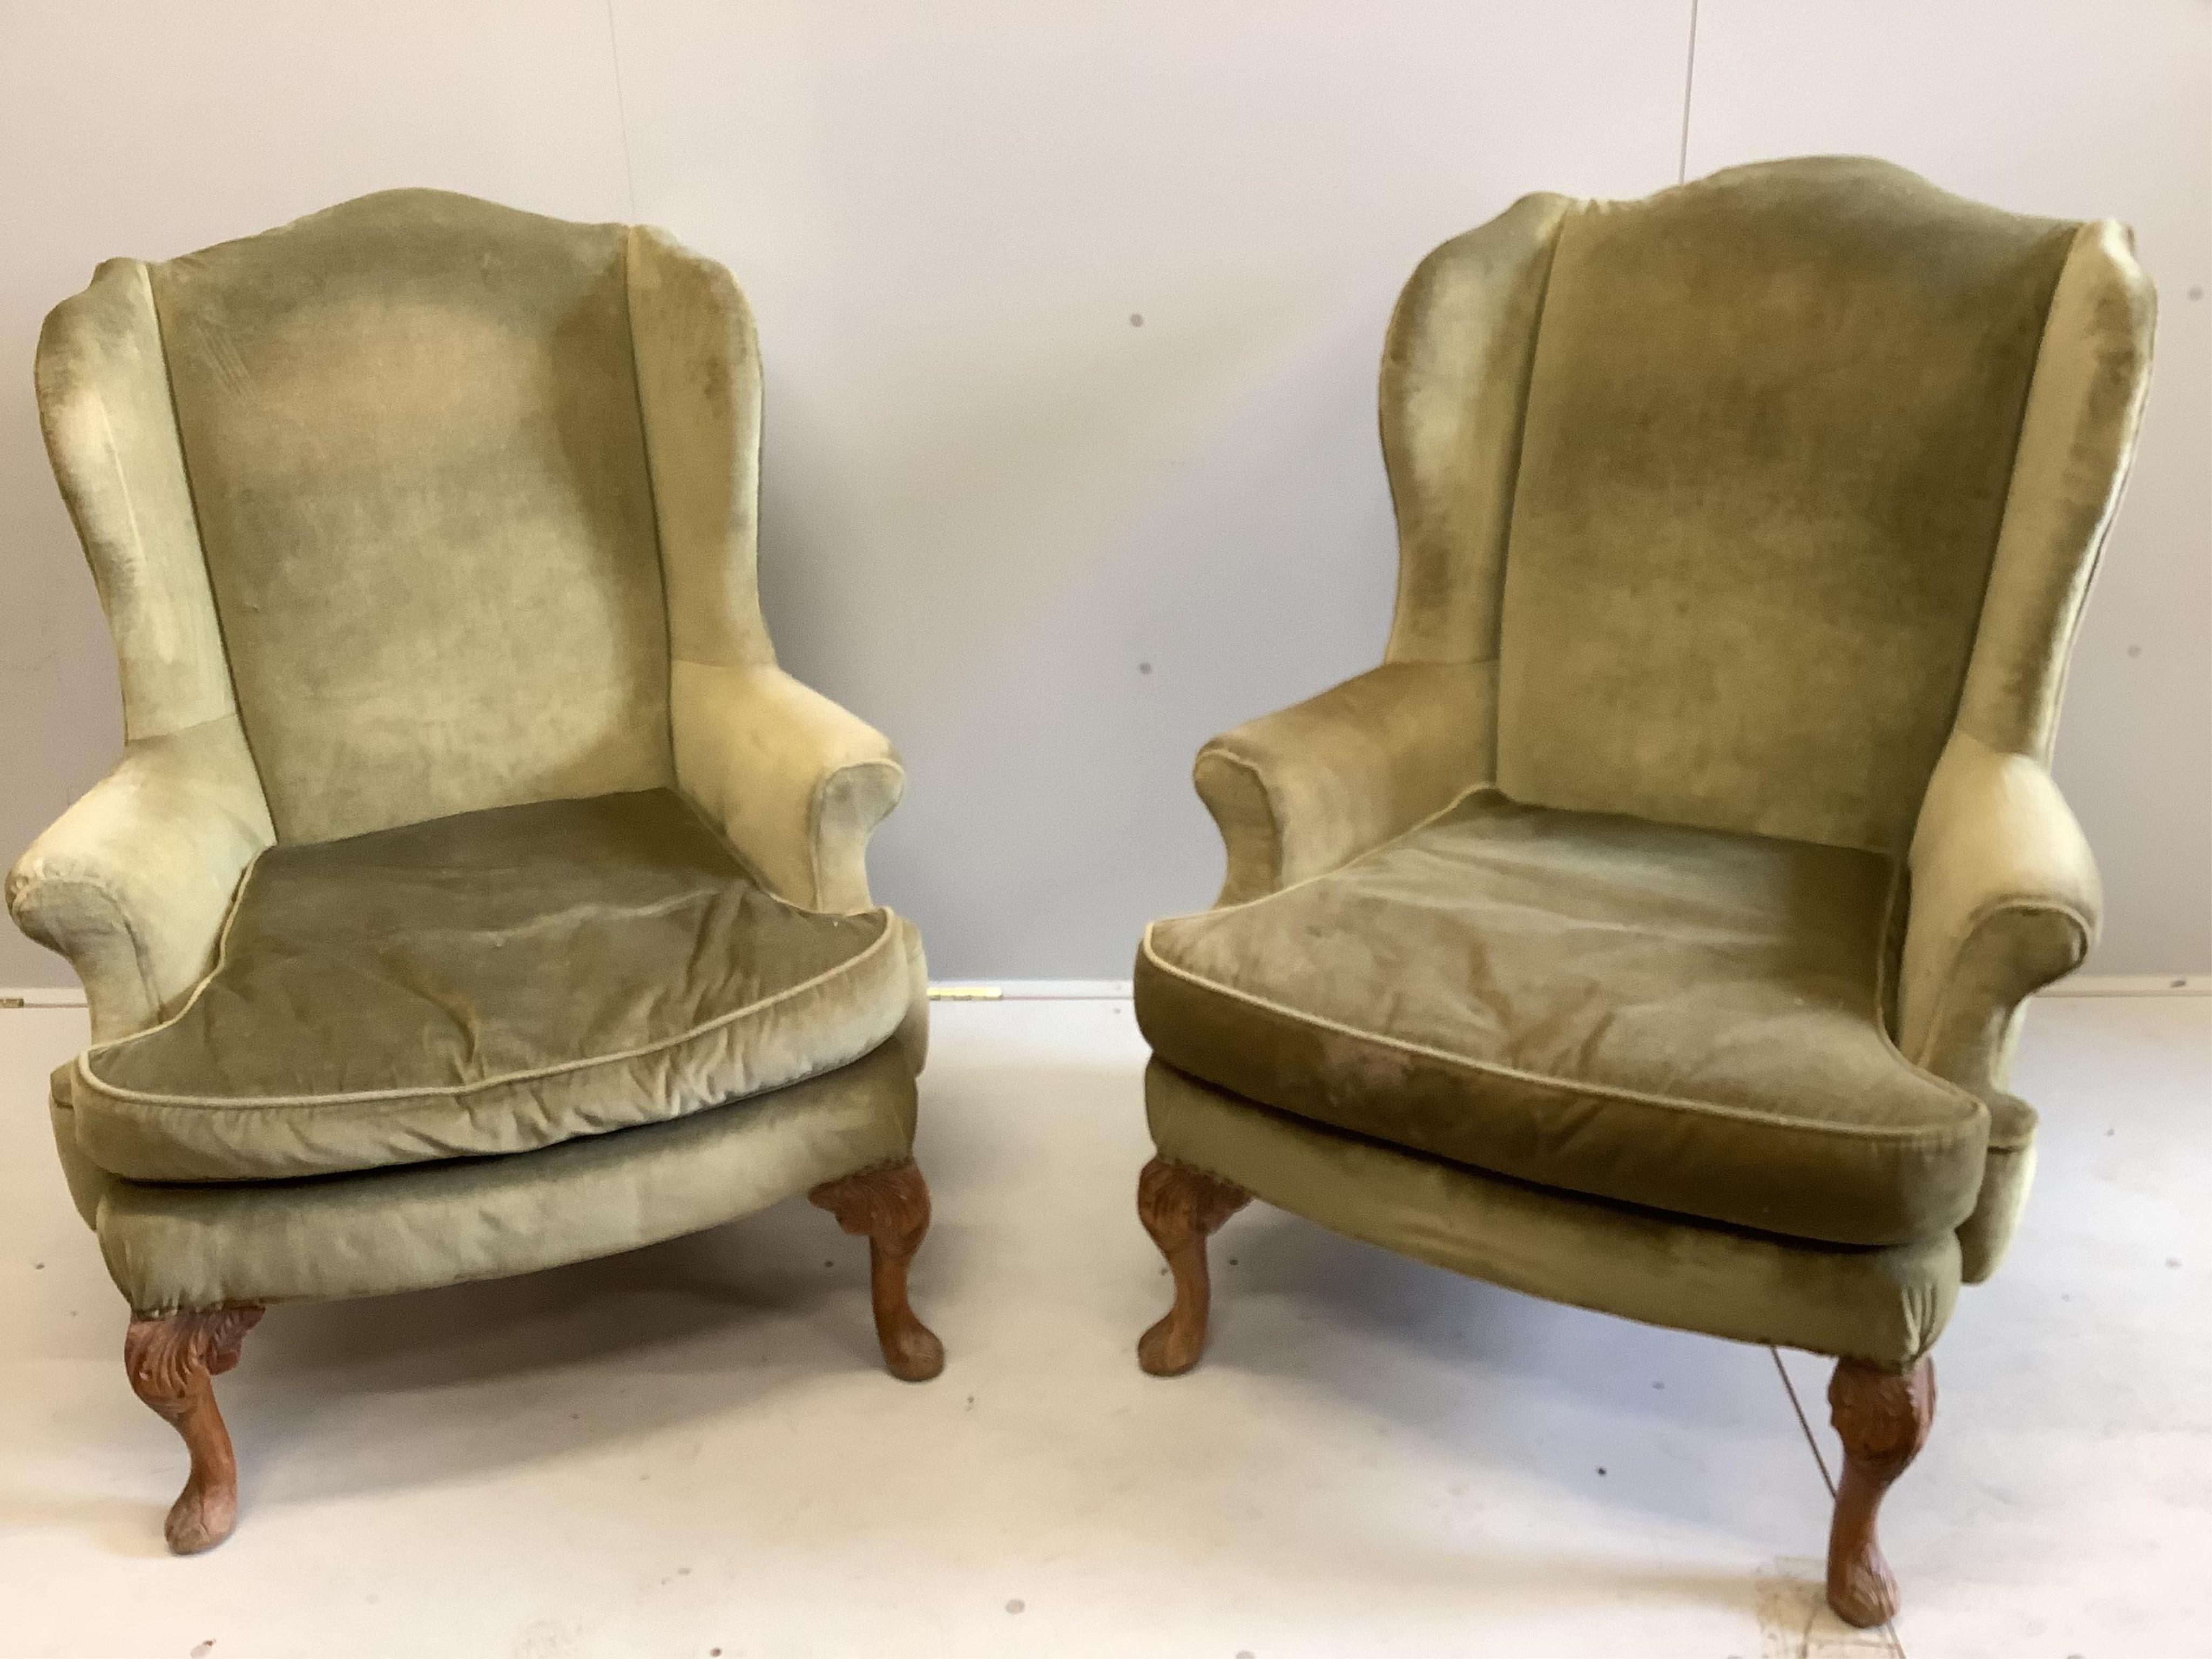 A pair of George I style upholstered wing armchairs, width 82cm, depth 88cm, height 104cm. Condition - fair